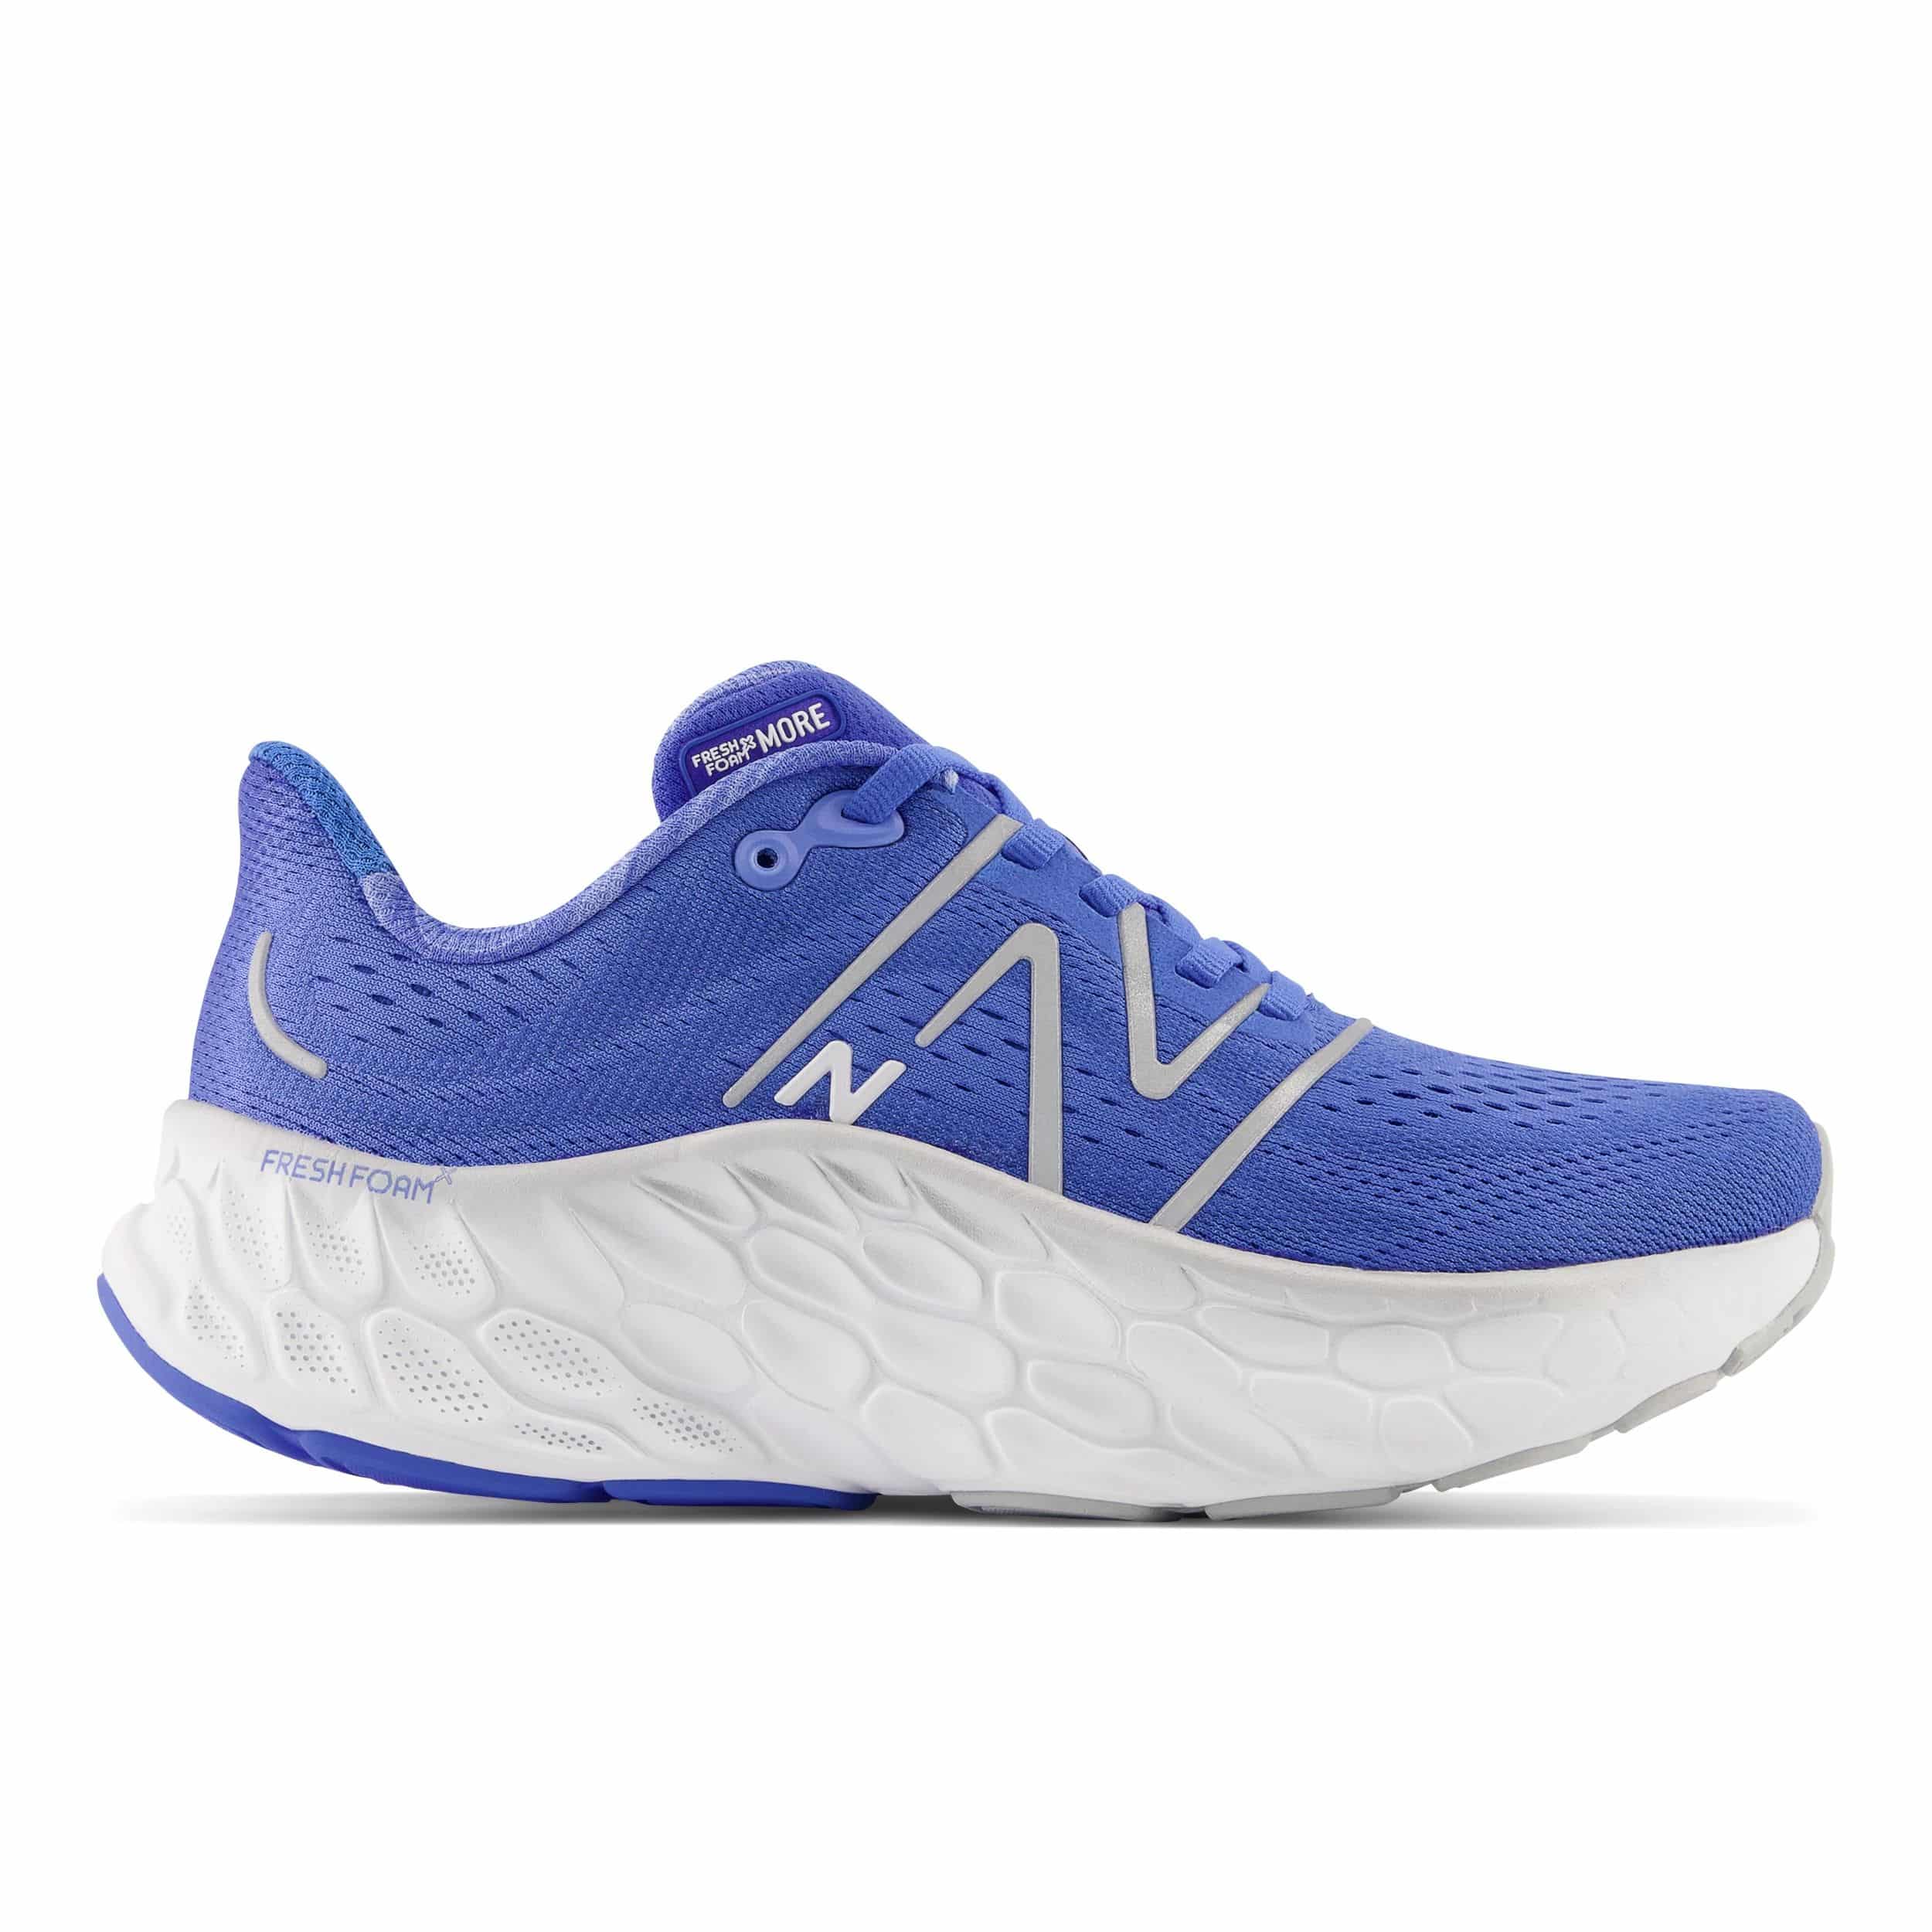 More Miles, More Often - New Balance Launches The Fresh Foam X More v4 ...